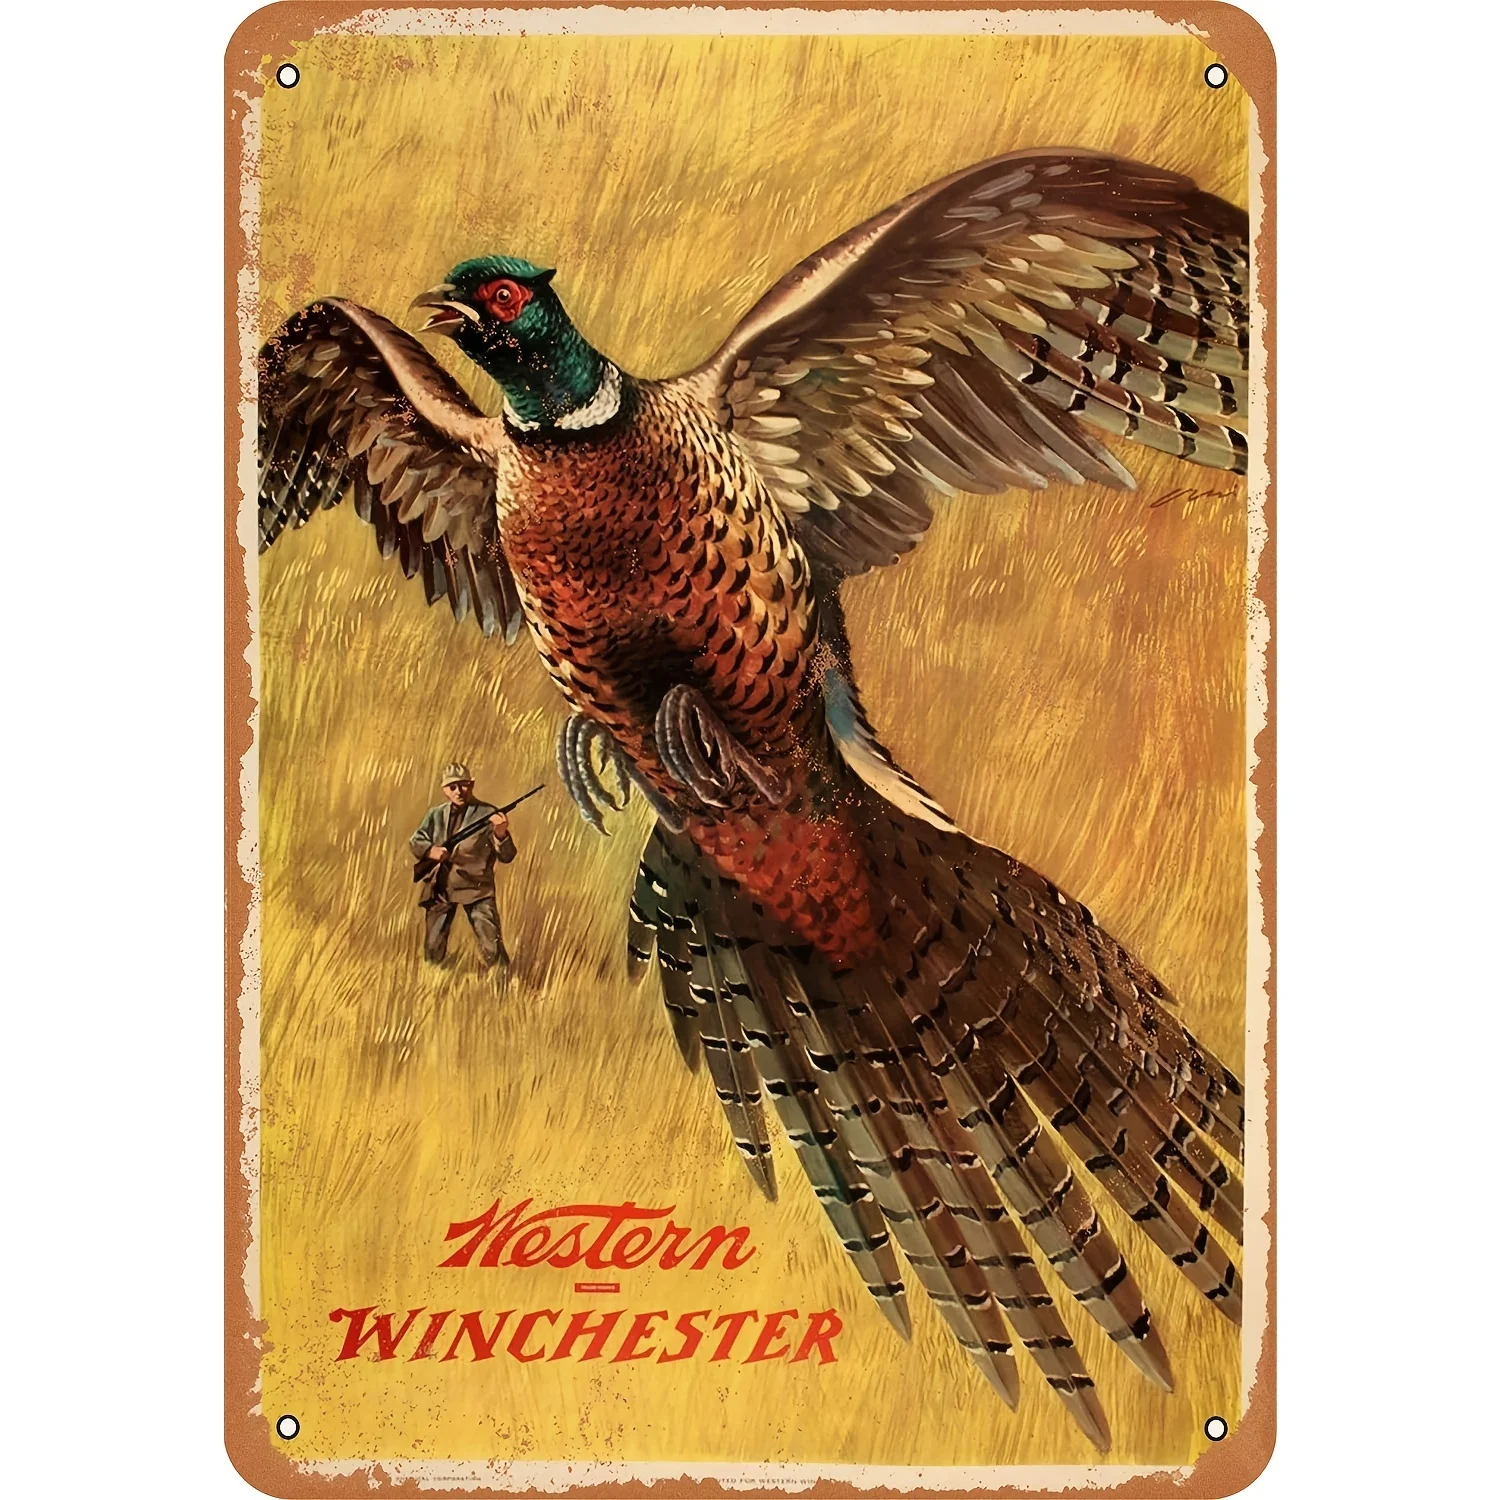 

Tin Metal Sign Vintage Look 1958 Western Winchester Pheasant Bar Cafe Home Wall Art Deco 12x8 Inches